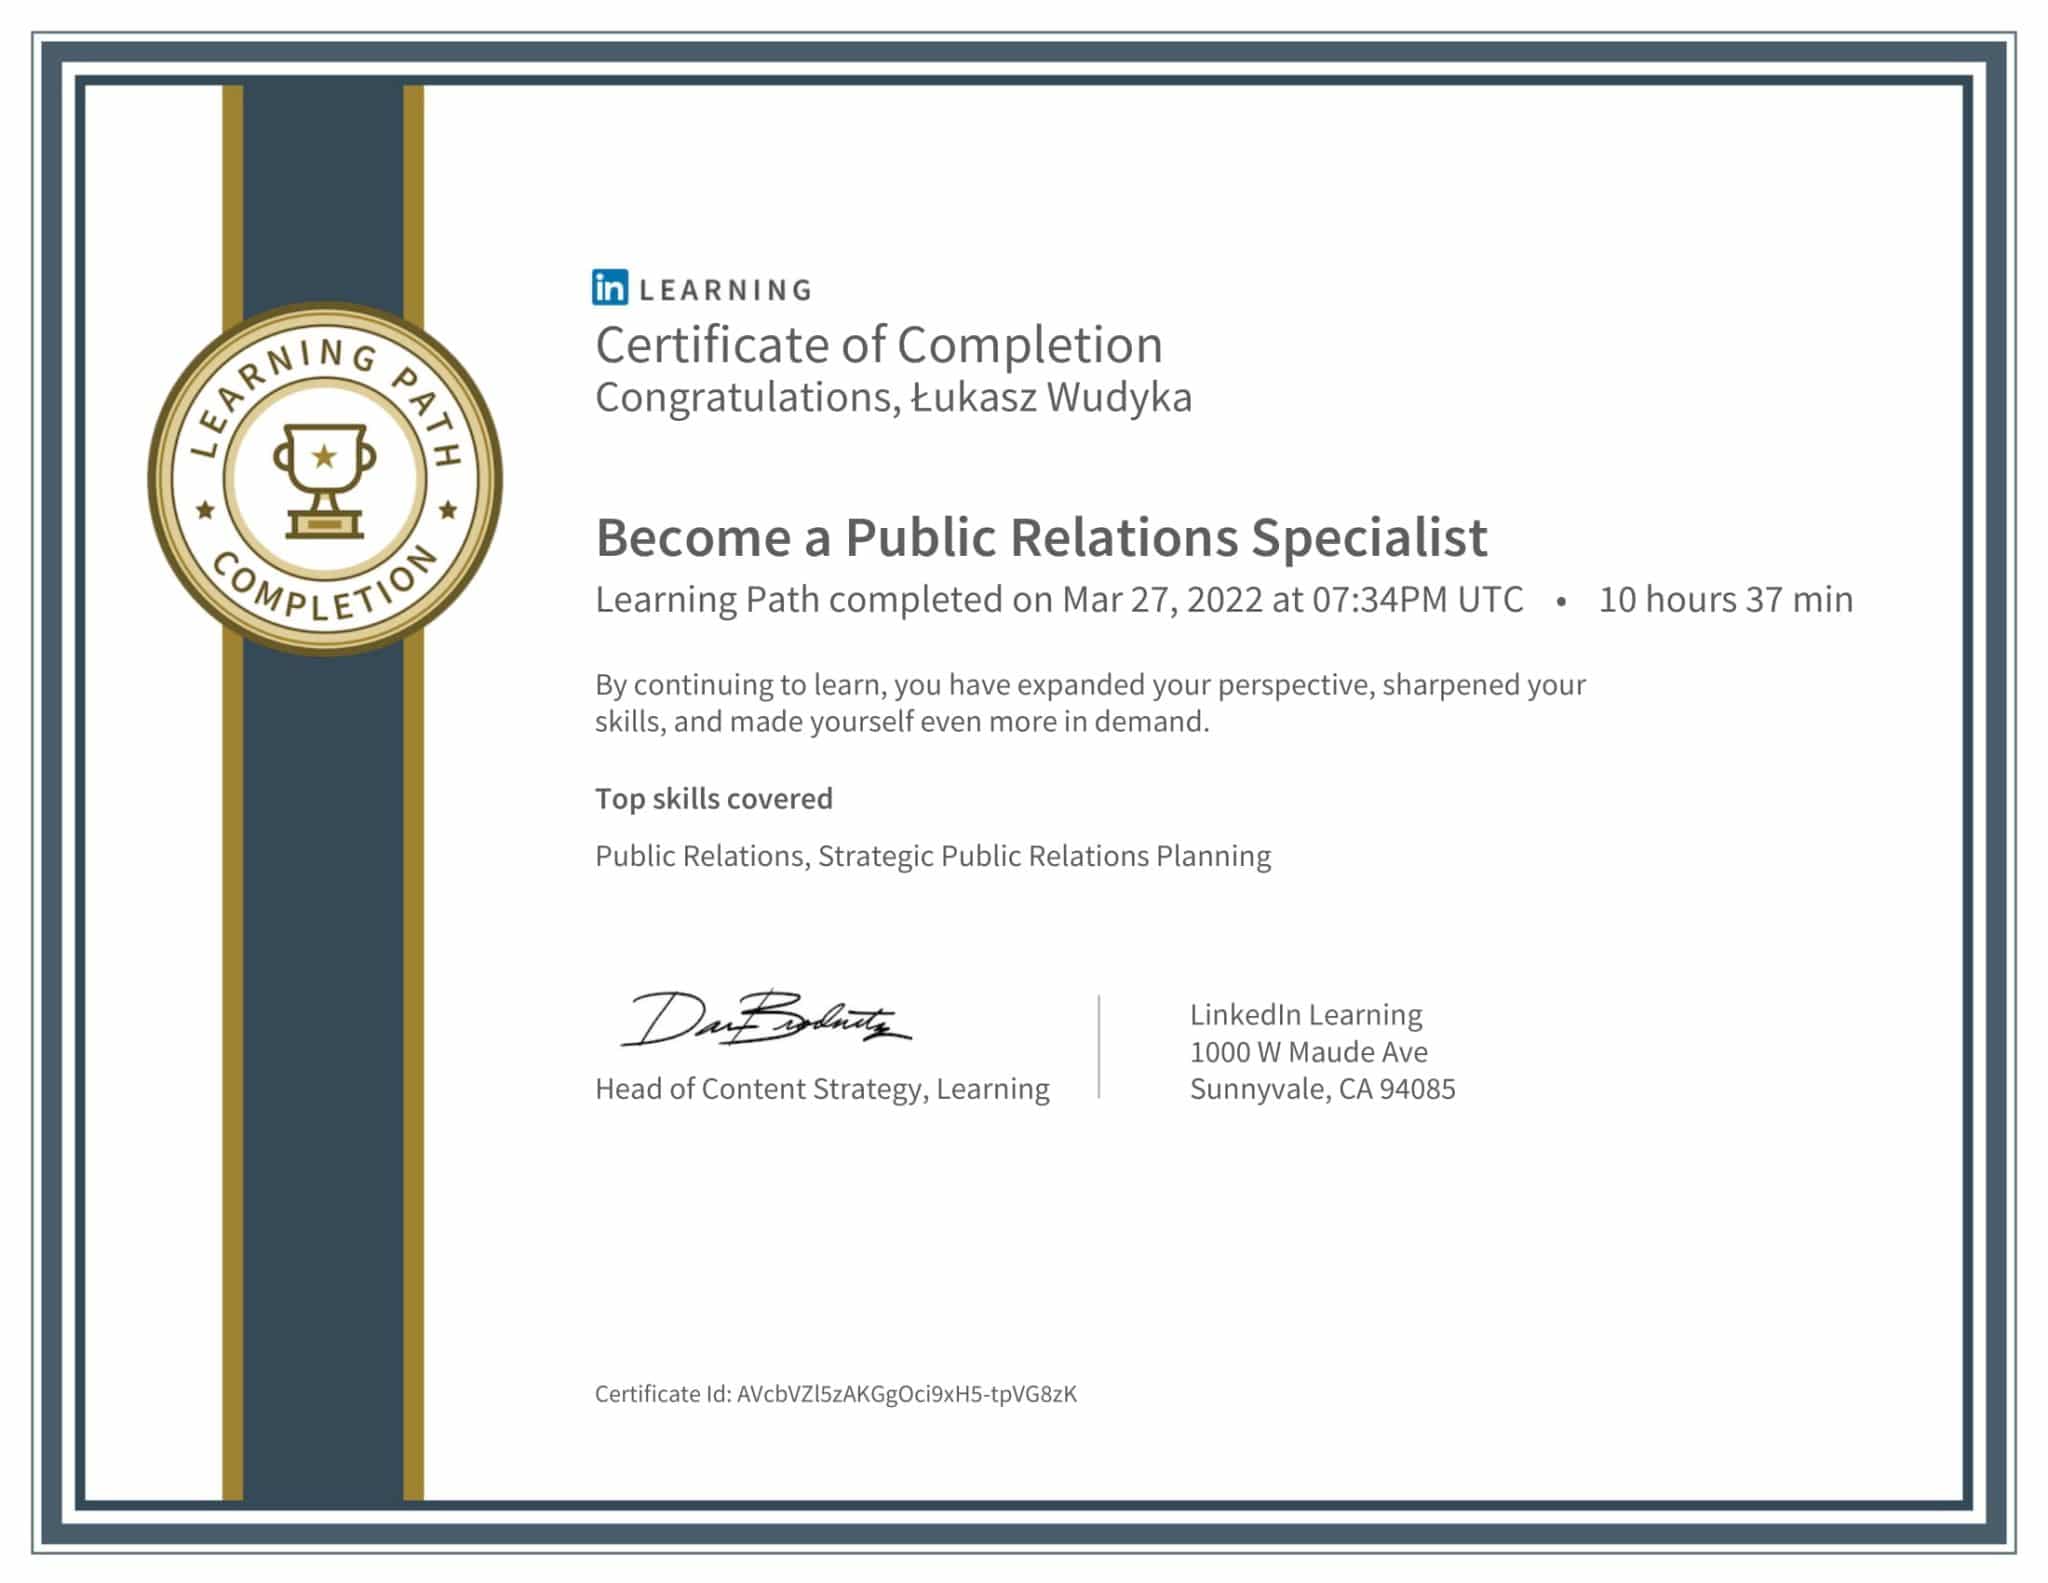 CertificateOfCompletion_Become a Public Relations Specialist-1